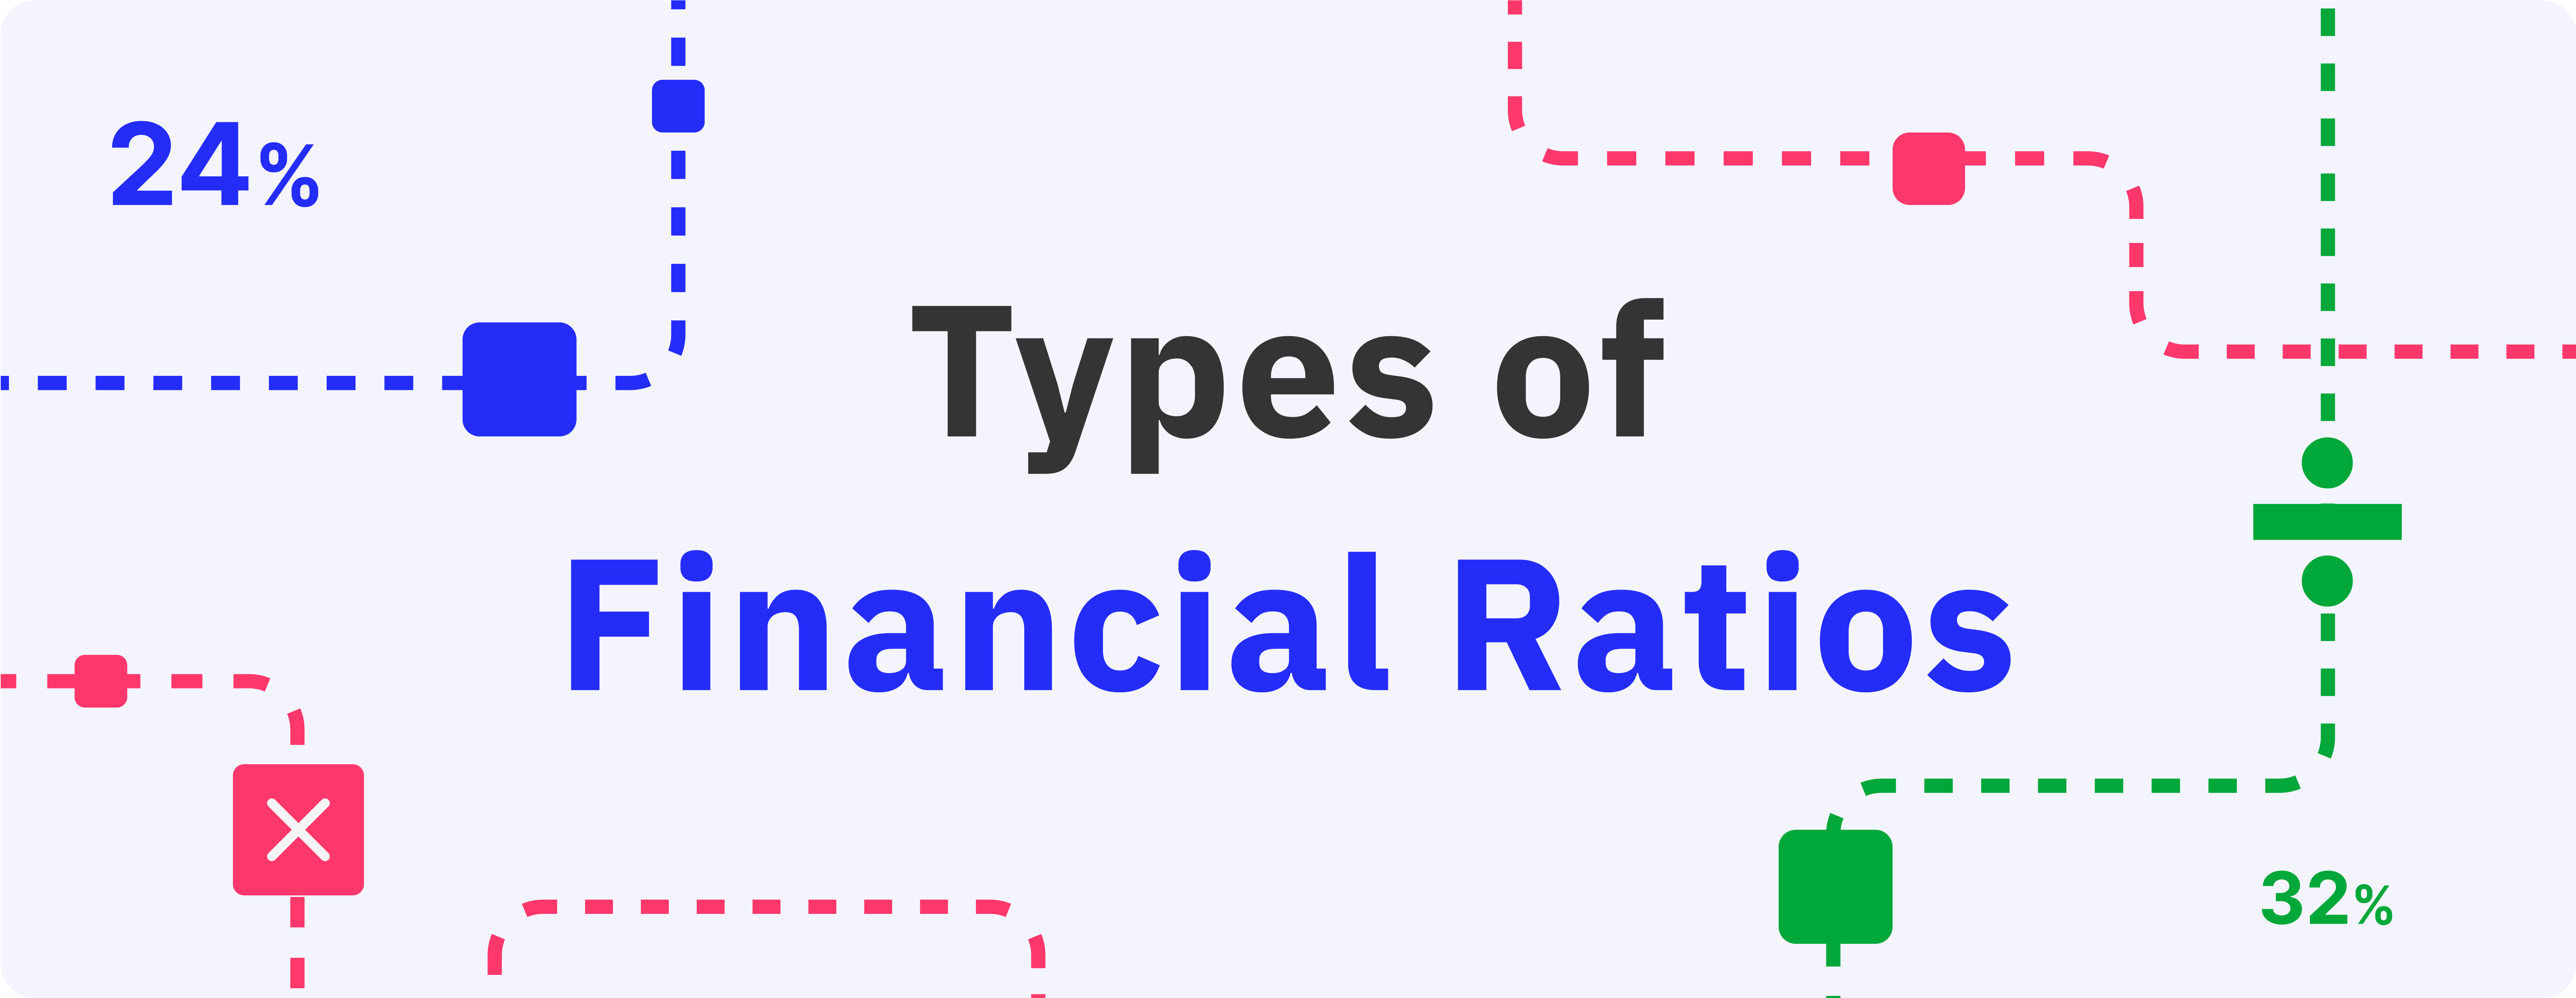 Types of Financial Ratios: What Do They Tell You